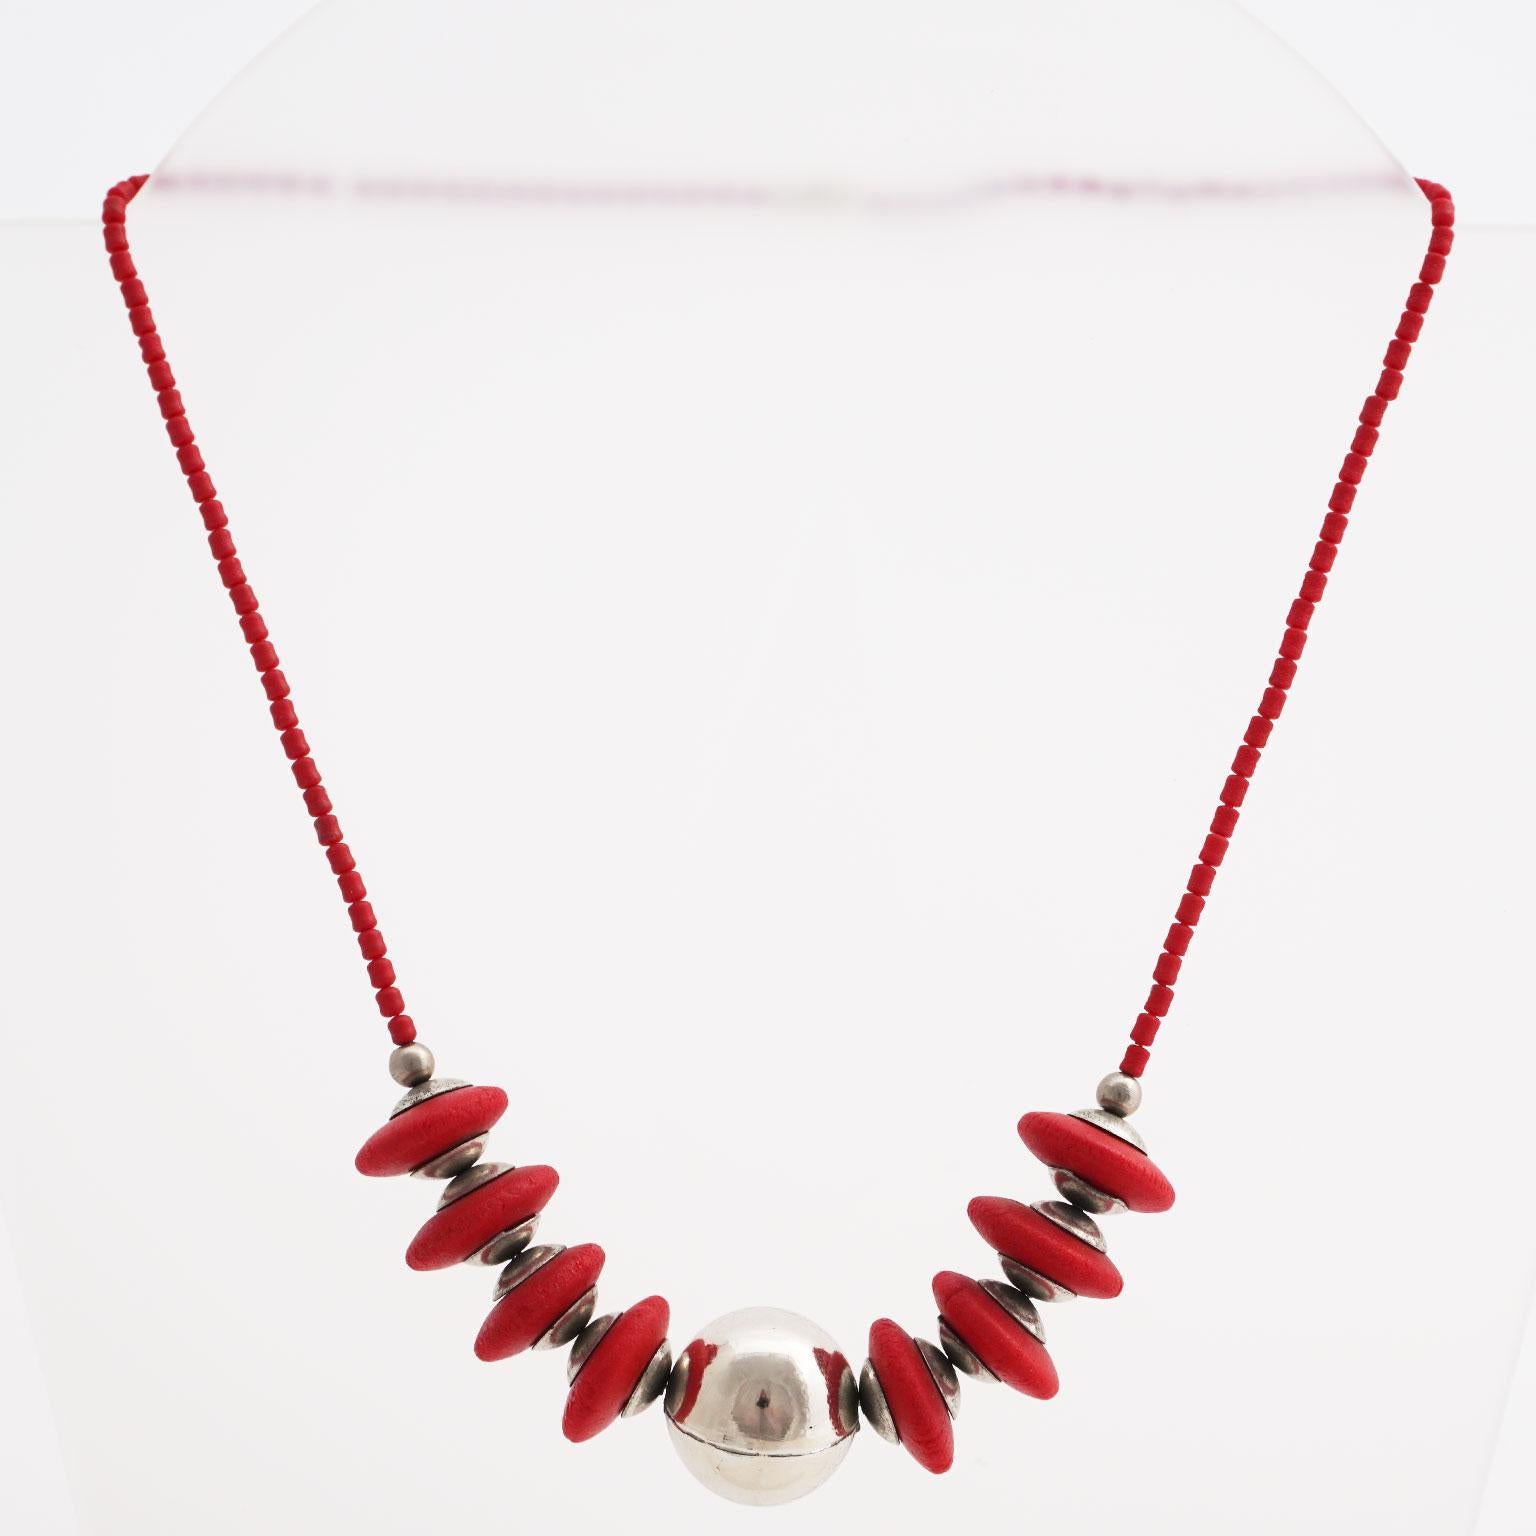 Bauhaus Collier in Chrome and Galalith by Jakob Bengel, around 1920/30 For Sale 6